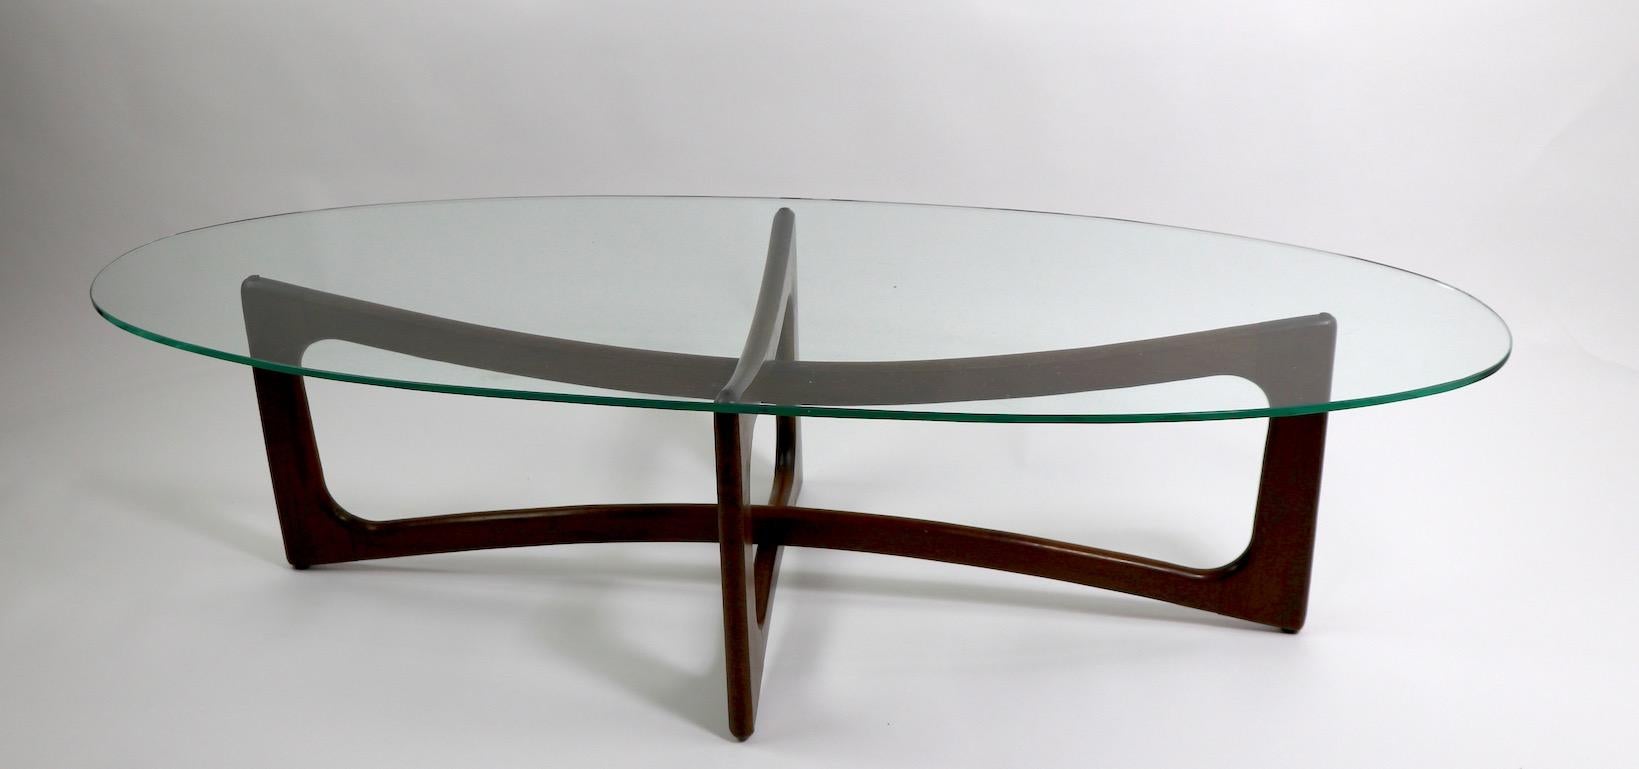 Iconic and Classic Pearsall surfboard glass top coffee table with oval glass top ( .25 inch thick ) and interlocking sculpted wood legs. Original, clean condition, plate glass top has a very small pock mark (pictured) and normal wear consistent with